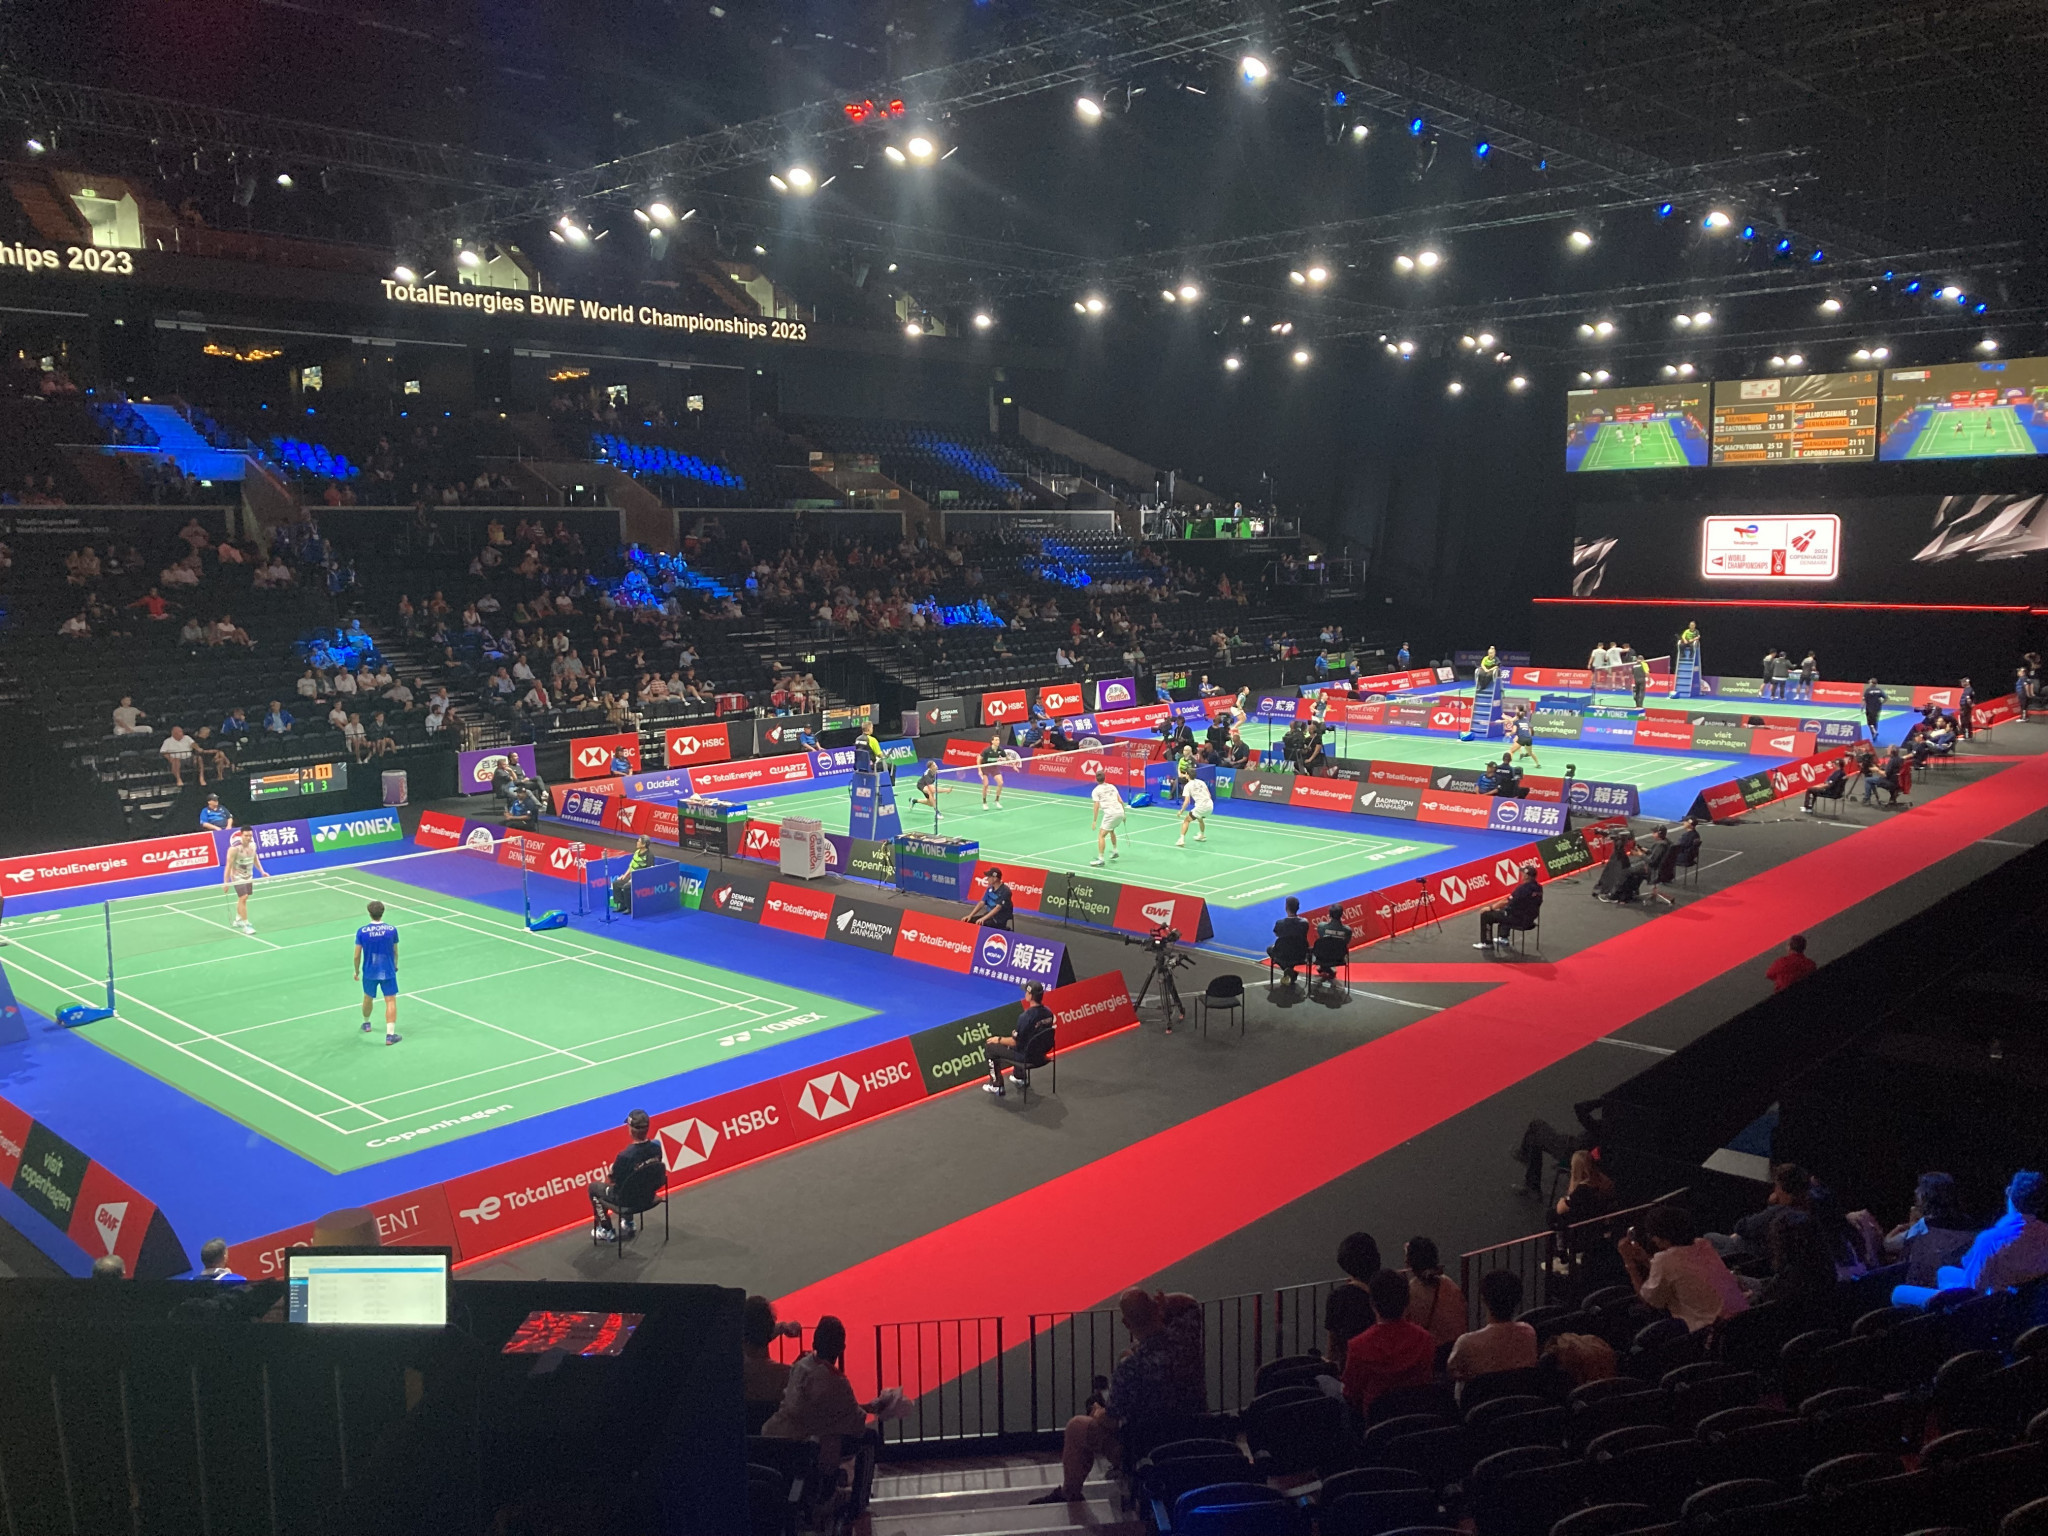 The Royal Arena which can hold more than 10,000 spectators, is the venue for this year's World Championships ©ITG